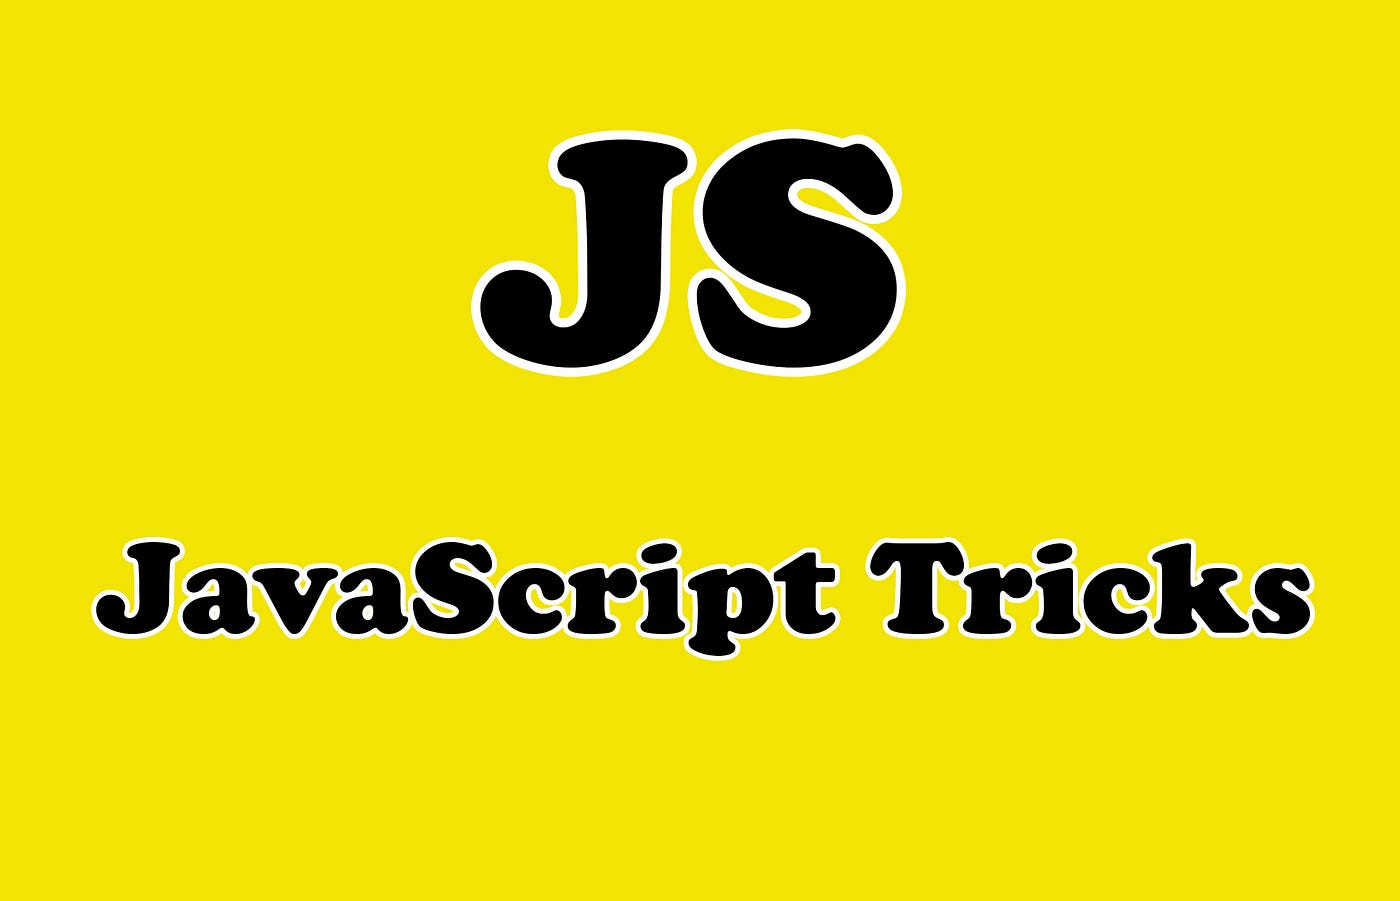 7 Extremely Powerful JavaScript Tricks that You Should Know